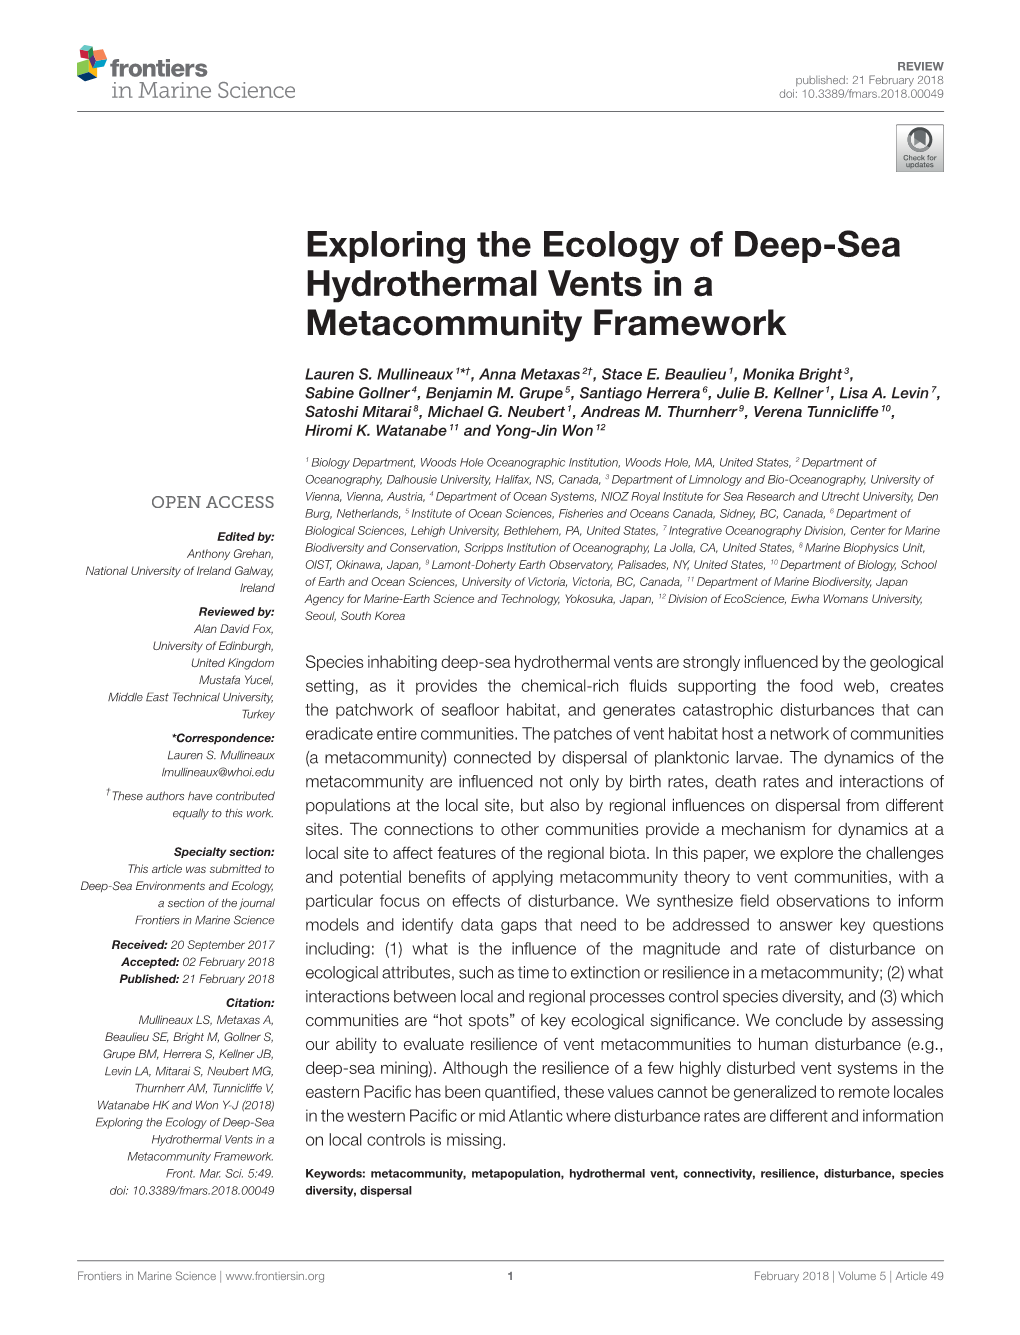 Exploring the Ecology of Deep-Sea Hydrothermal Vents in a Metacommunity Framework